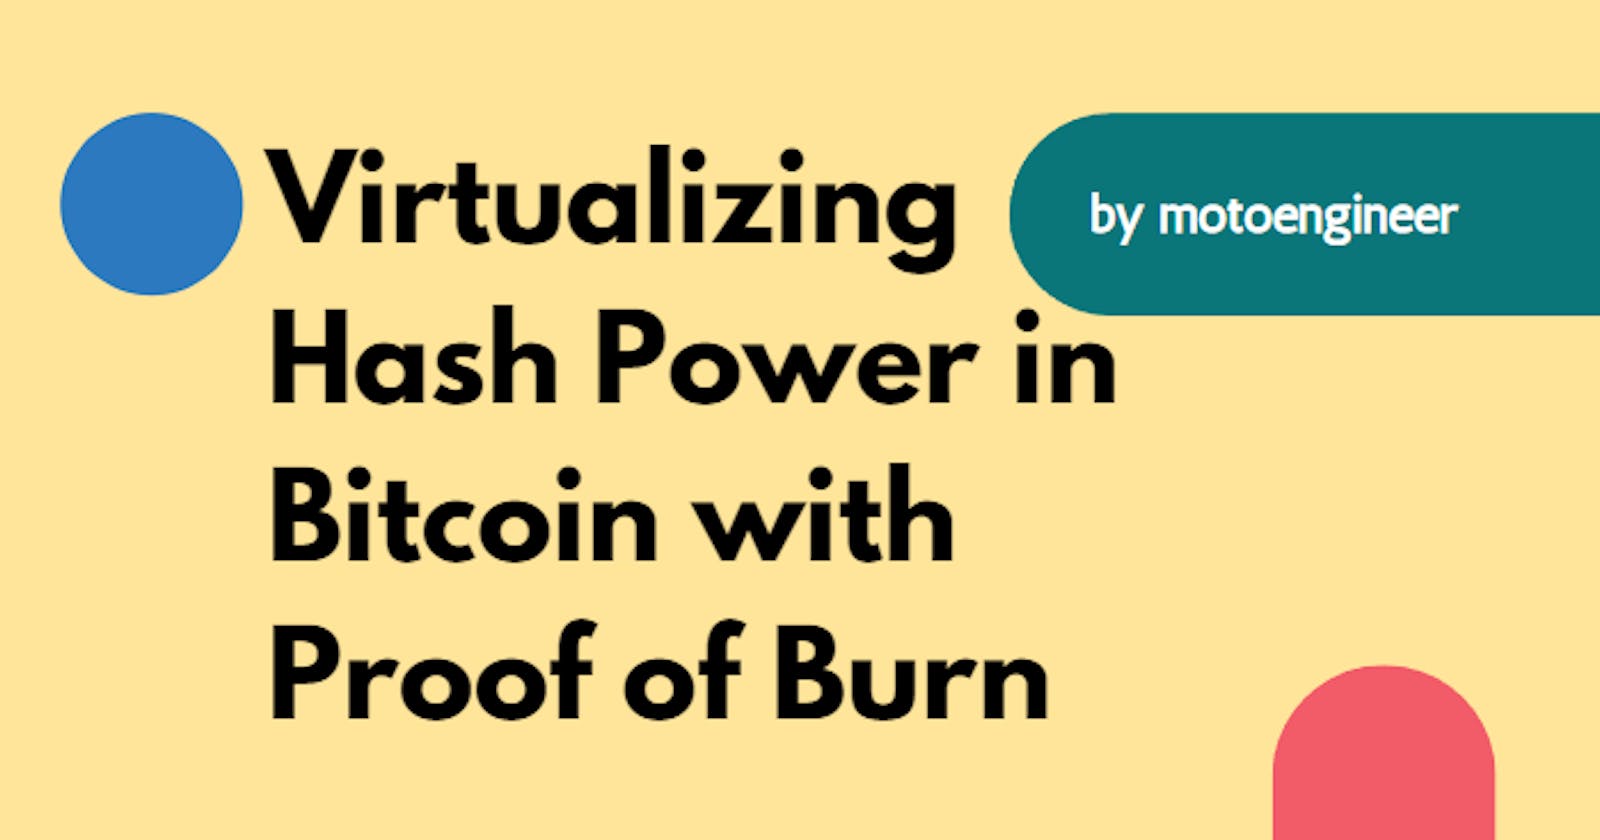 Virtualizing Hash Power in Bitcoin with Proof of Burn